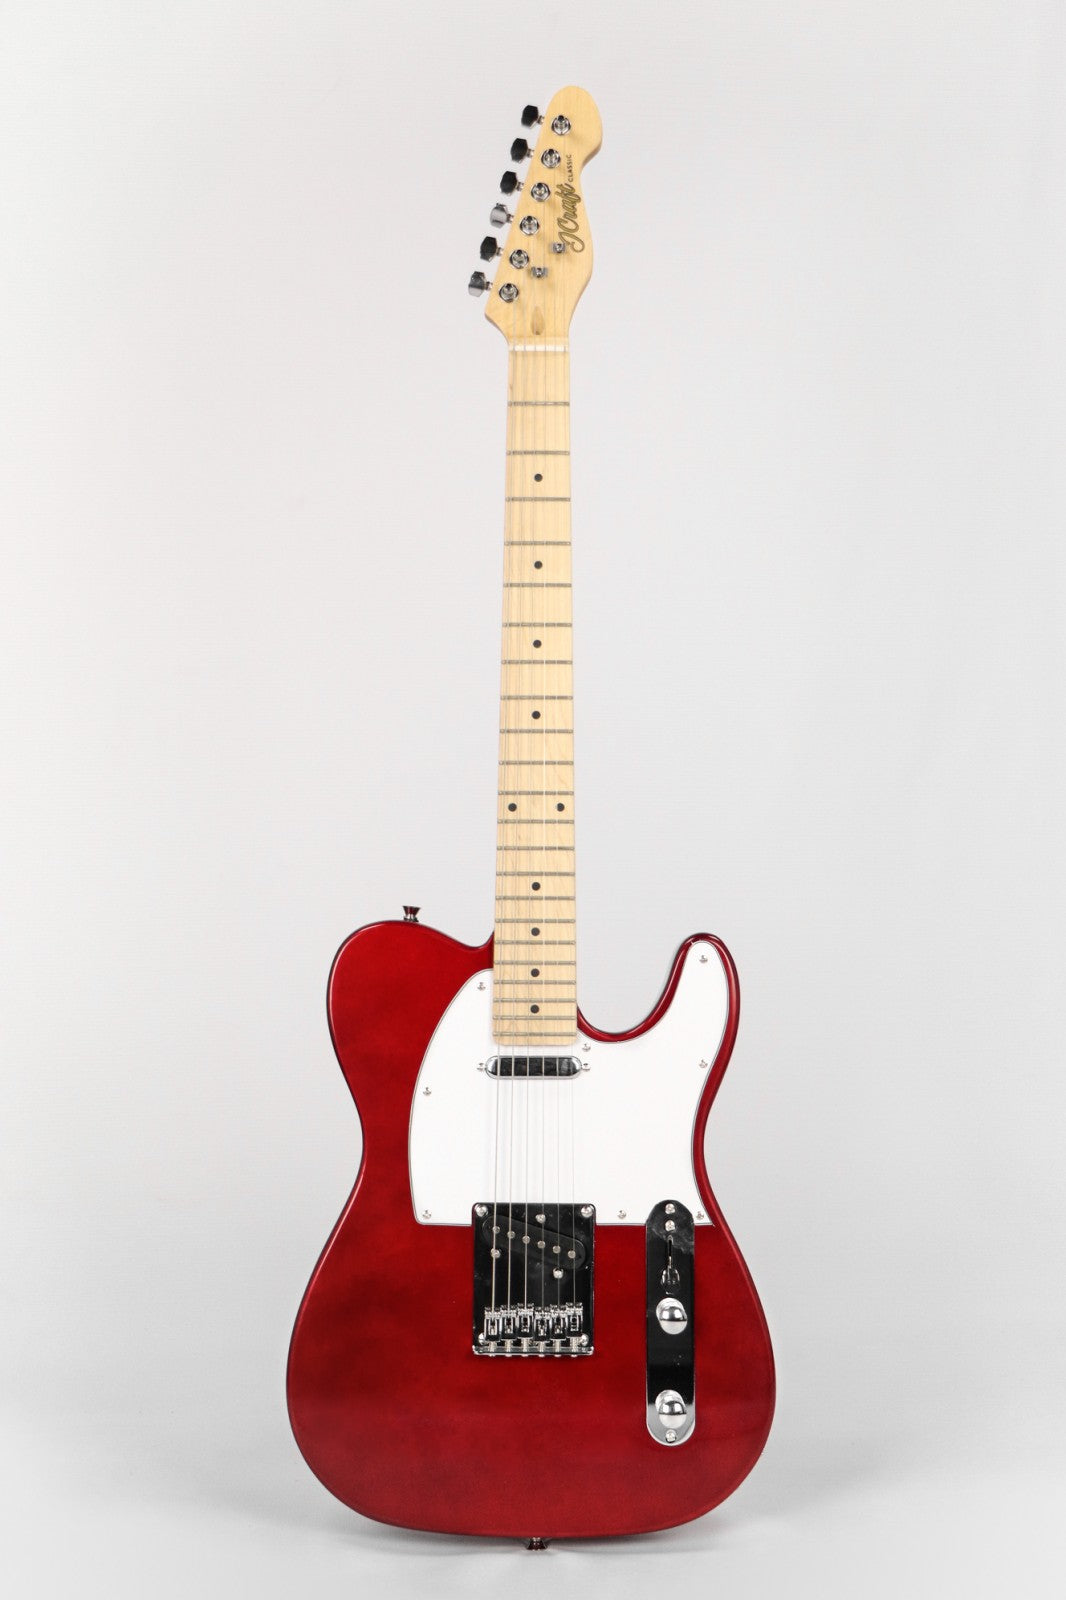 JCraft T-1 T-Style Electric Guitar with Gigbag - Metallic Red